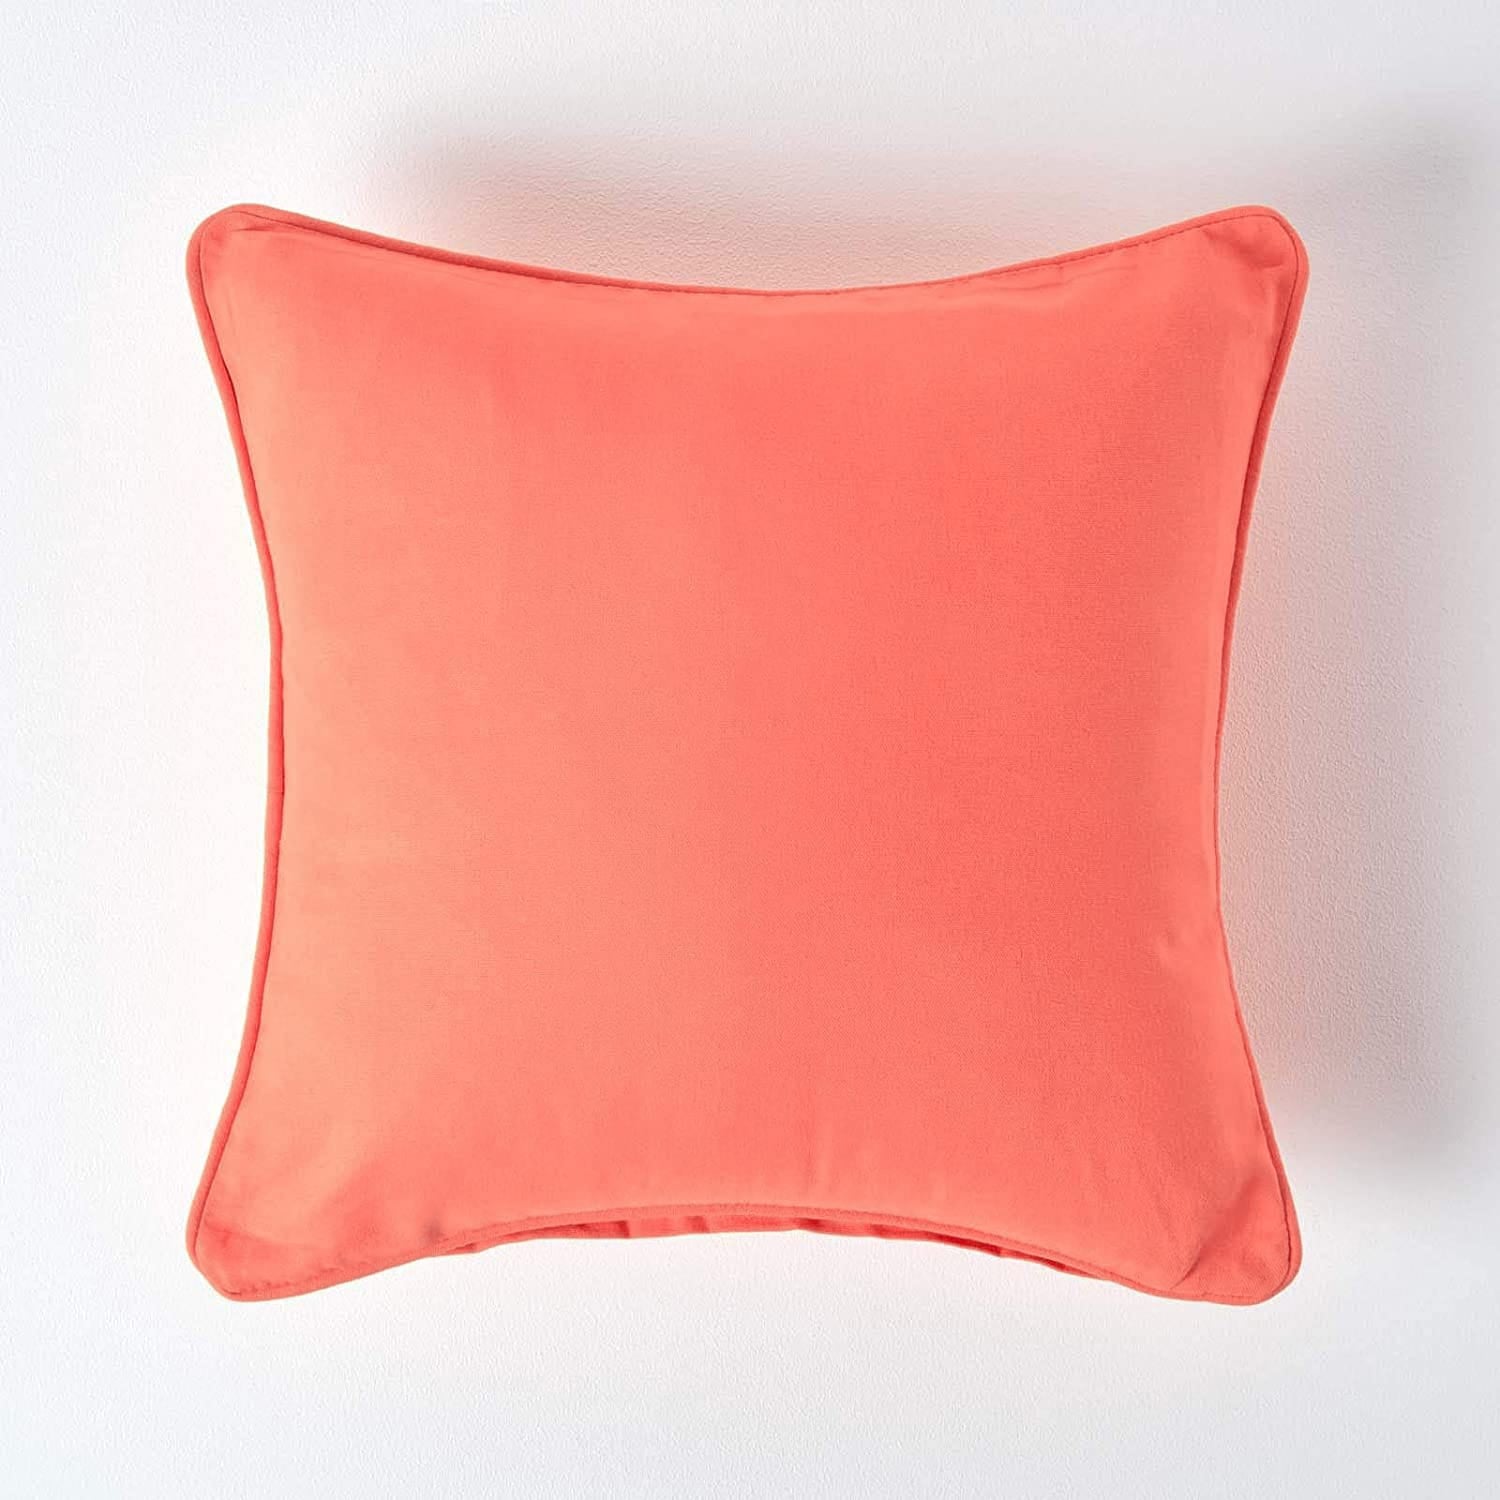 Plain Cotton Decorative Cushion Cover 1 Pc in Peach online at best prices